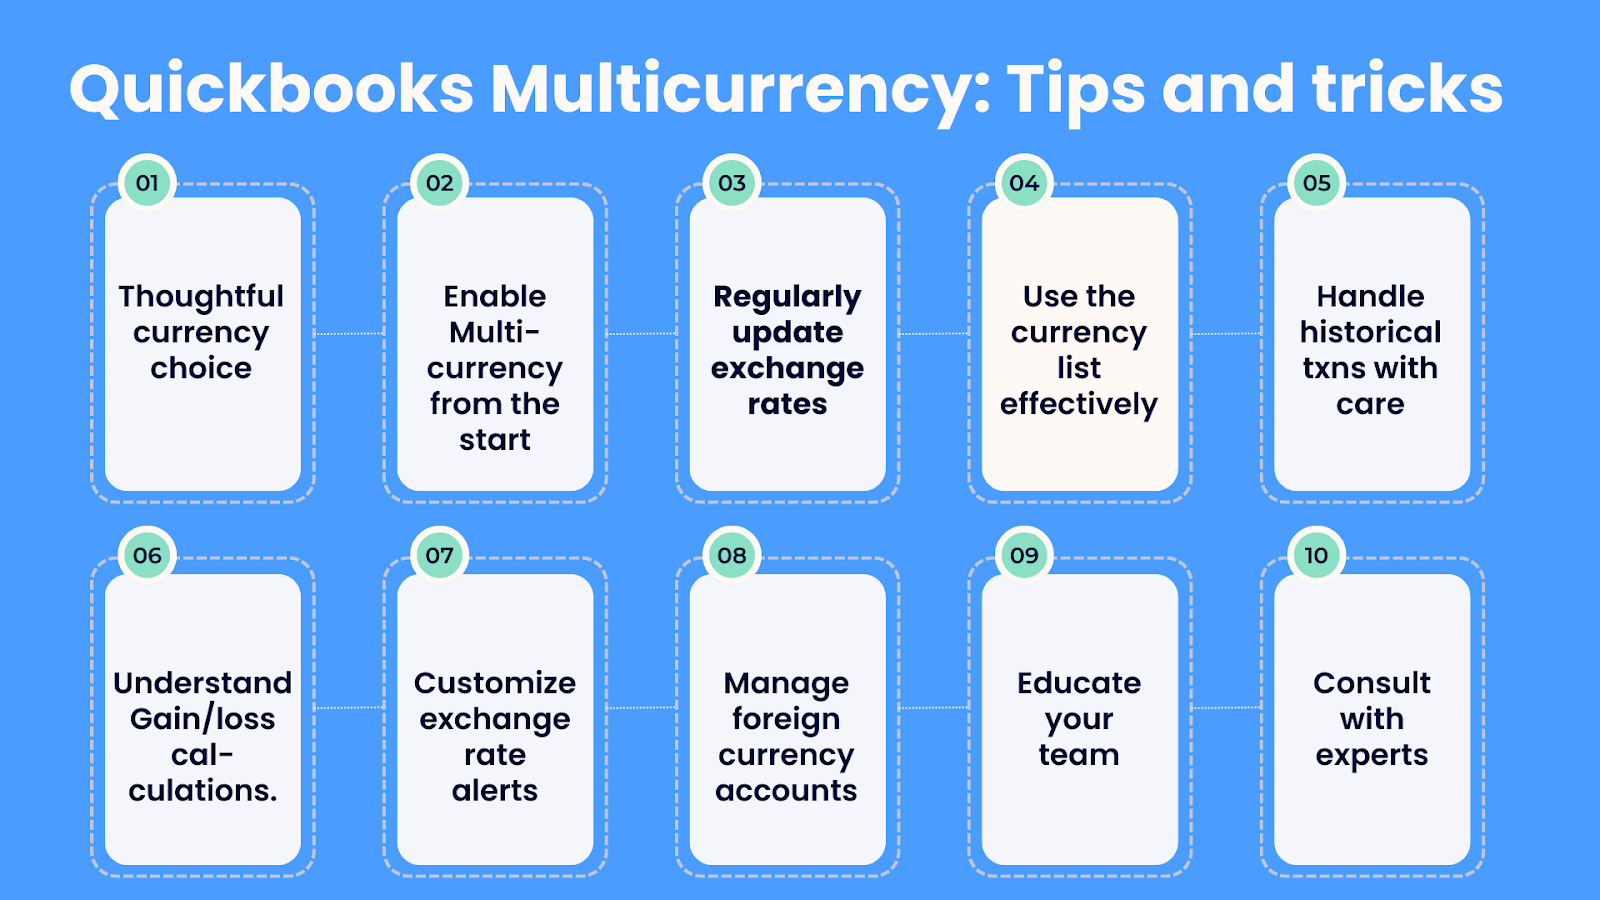 Quickbooks Multicurrency: Tips and tricks